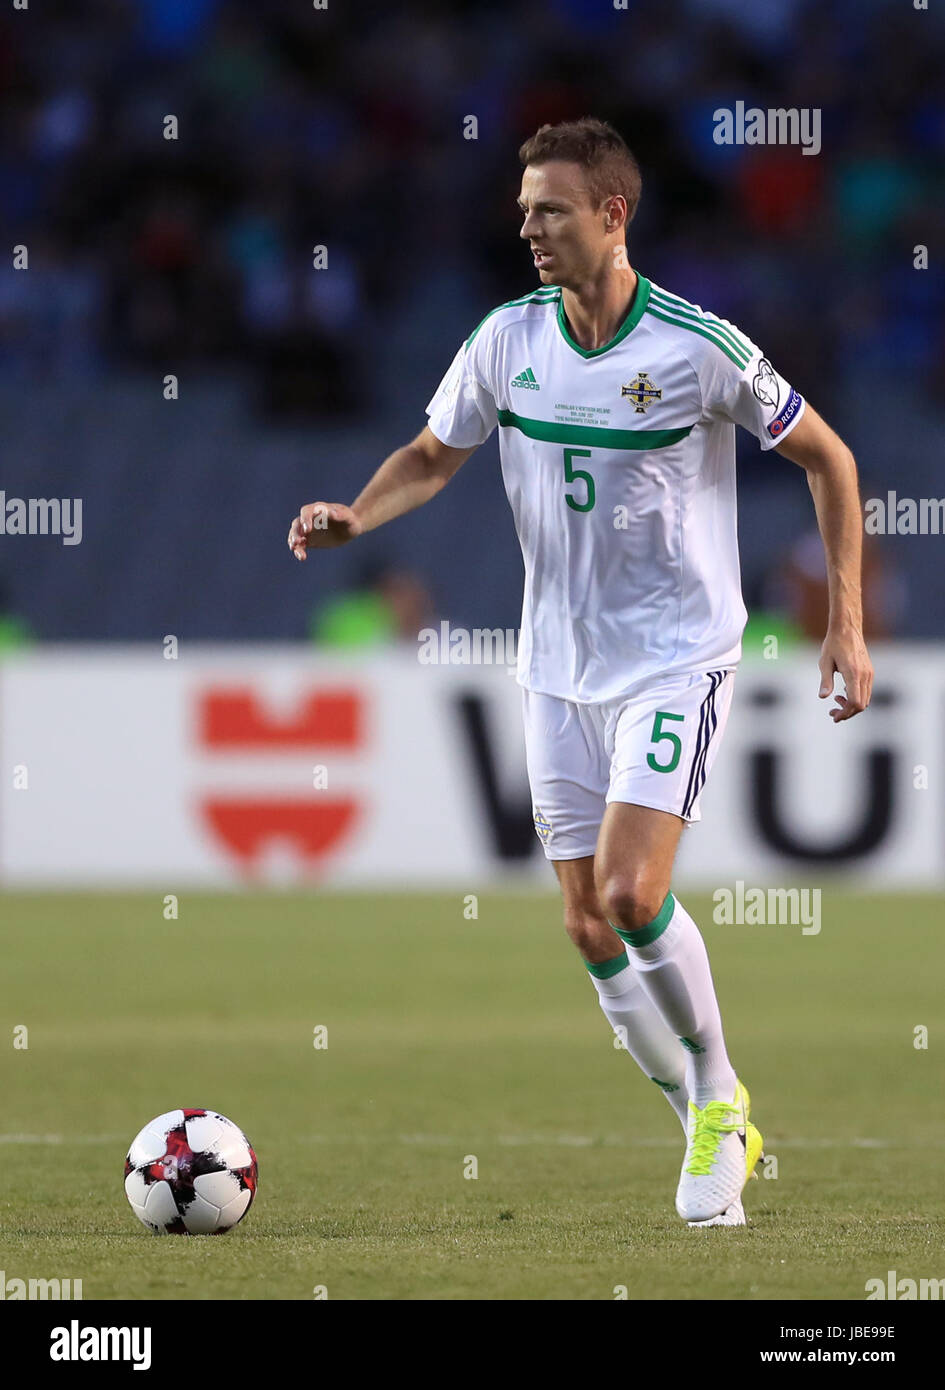 Northern Ireland's Jonny Evans during the 2018 FIFA World Cup qualifying, Group C match at the Tofik Bakhramov Stadium, Baku. PRESS ASSOCIATION Photo. Picture date: Saturday June 10, 2017. See PA story SOCCER Azerbaijan. Photo credit should read: Tim Goode/PA Wire. RESTRICTIONS: Editorial use only, no commercial use without prior permission, please contact PA Images for further information. Stock Photo